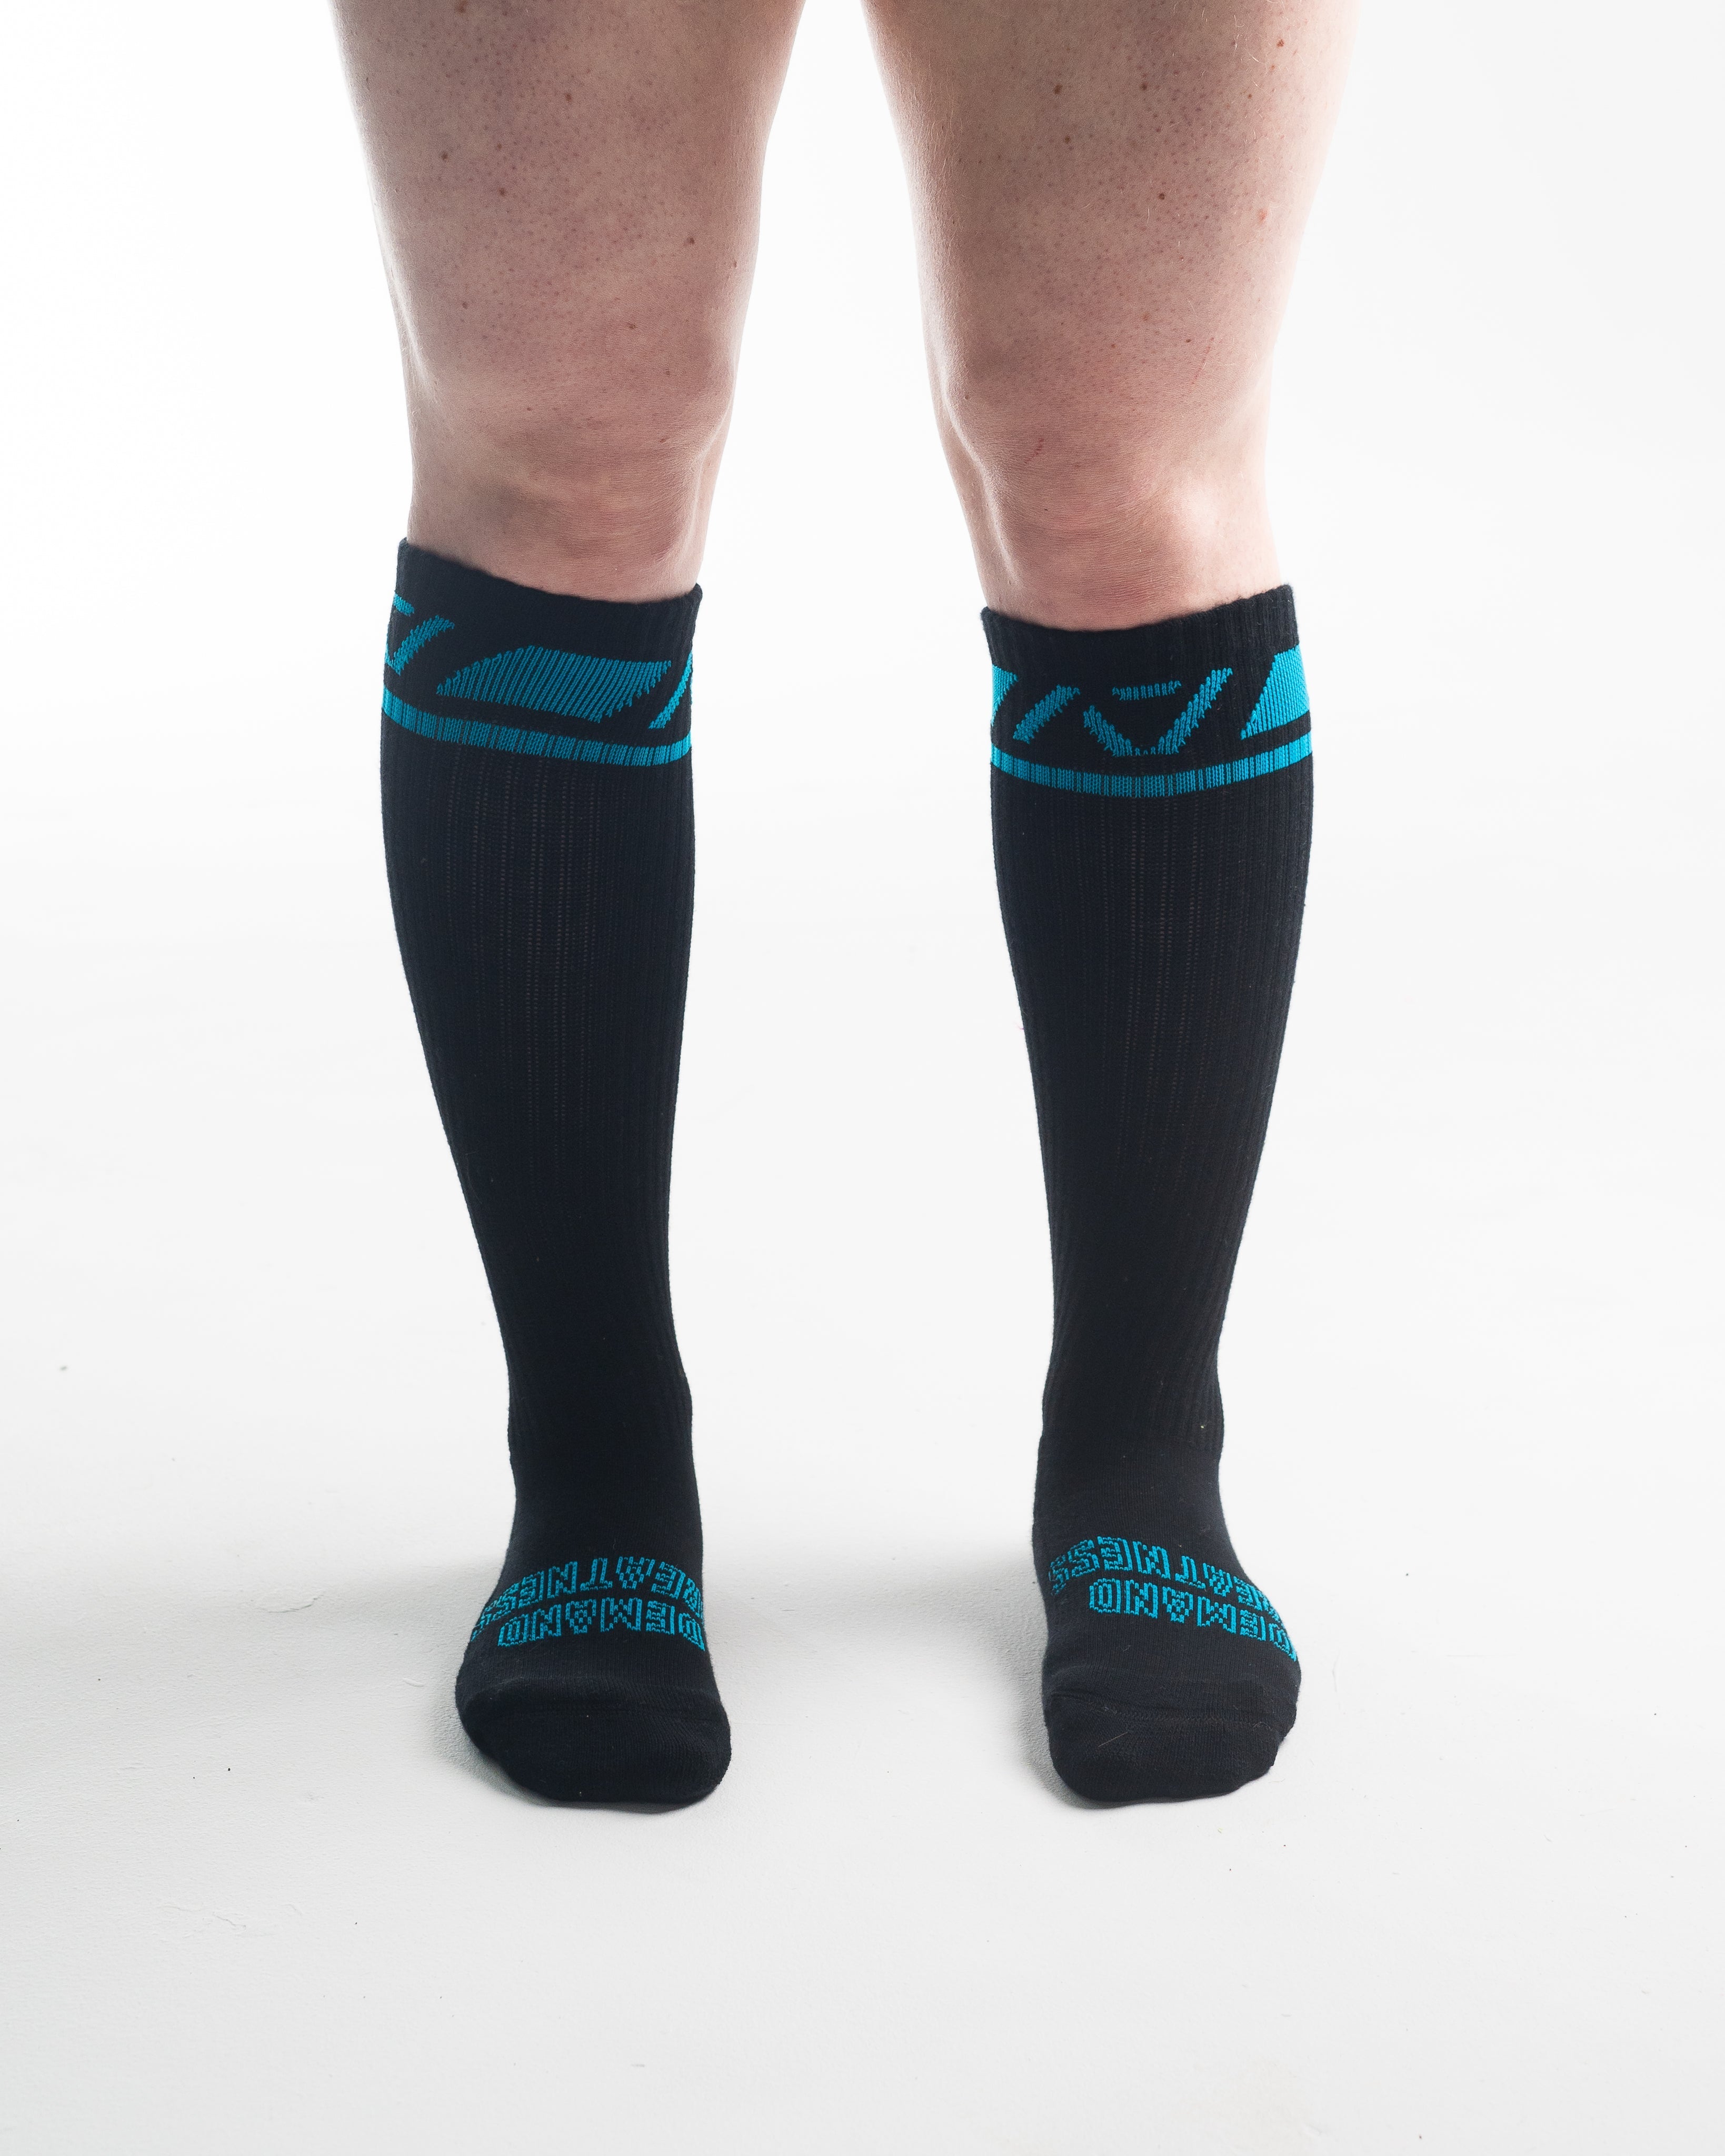 A7 Azul Deadlift socks are designed specifically for pulls and keep your shins protected from scrapes. A7 deadlift socks are a perfect pair to wear in training or powerlifting competition. The IPF Approved Kit includes Powerlifting Singlet, A7 Meet Shirt, A7 Zebra Wrist Wraps, A7 Deadlift Socks, Hourglass Knee Sleeves (Stiff Knee Sleeves and Rigor Mortis Knee Sleeves). Genouillères powerlifting shipping to France, Spain, Ireland, Germany, Italy, Sweden and EU.